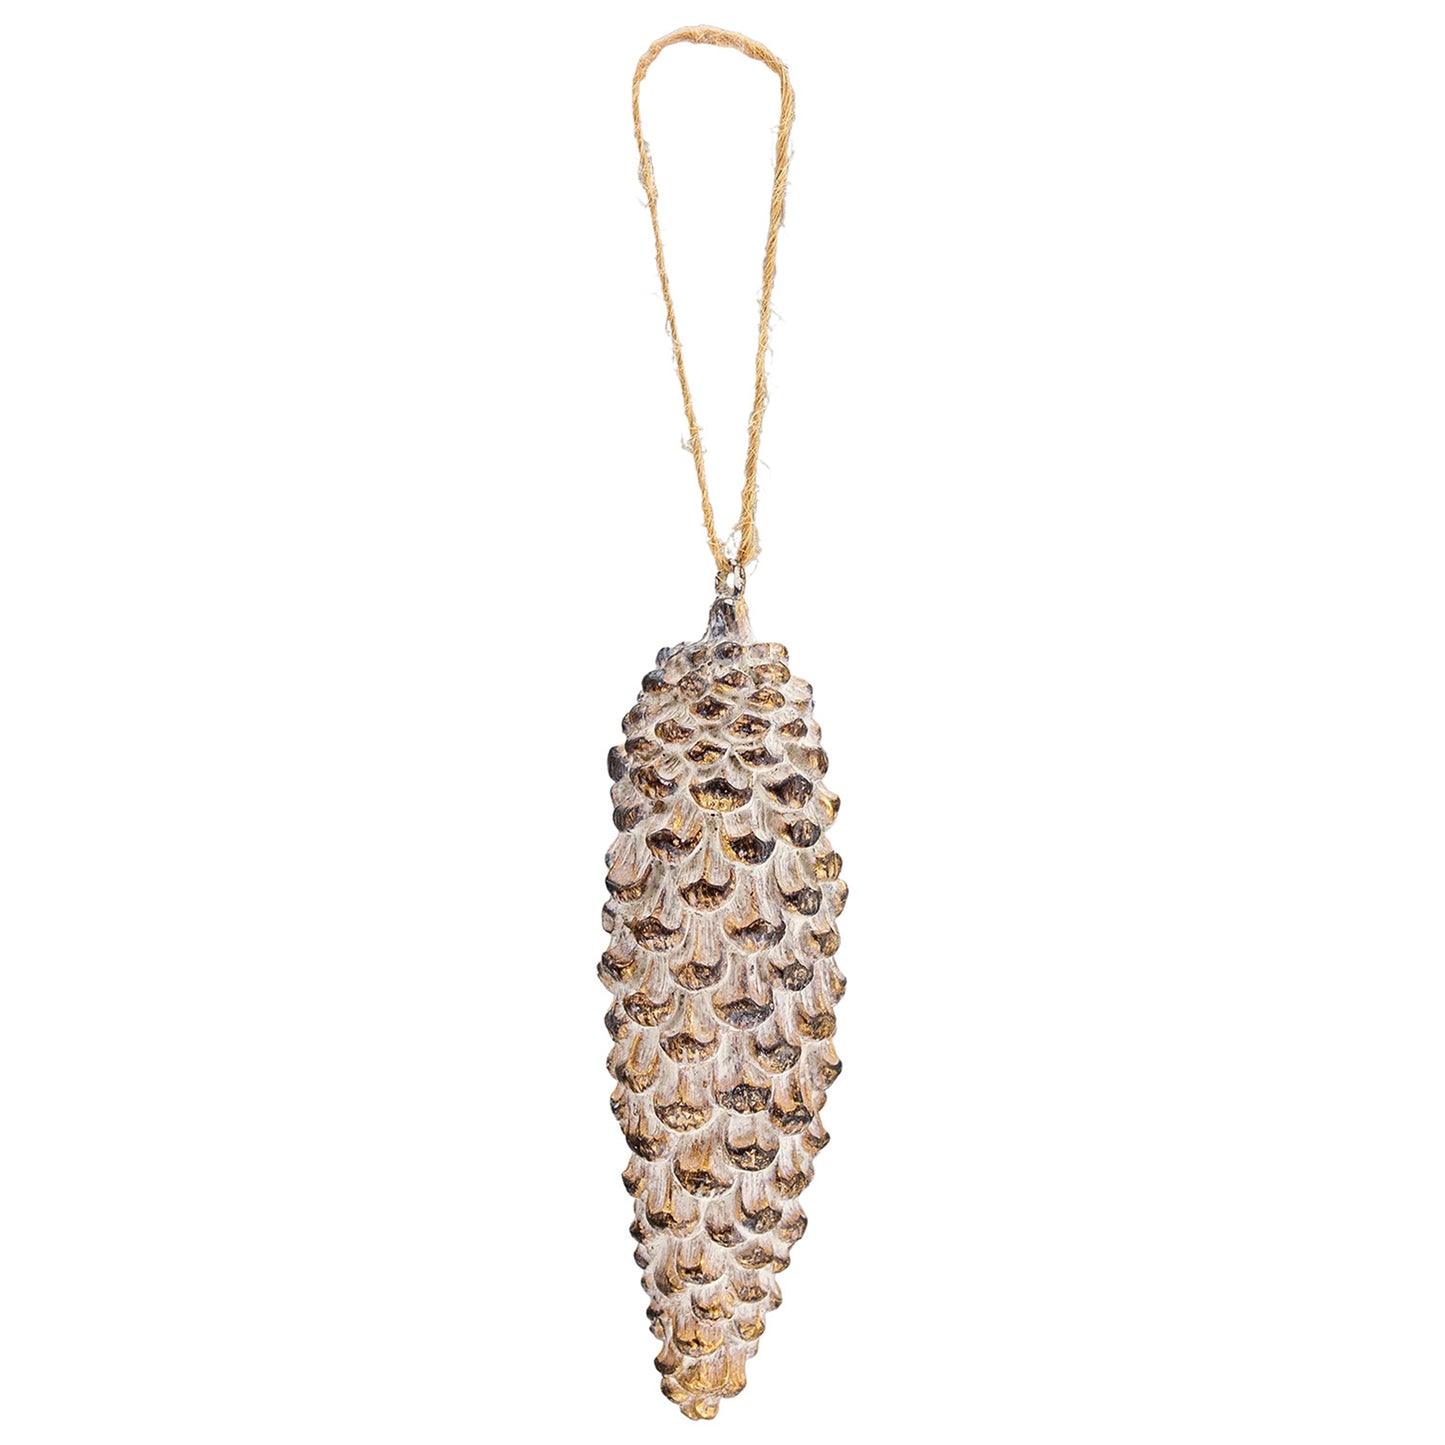 Skinny Golden Resin Pinecone Ornament - 5 inches